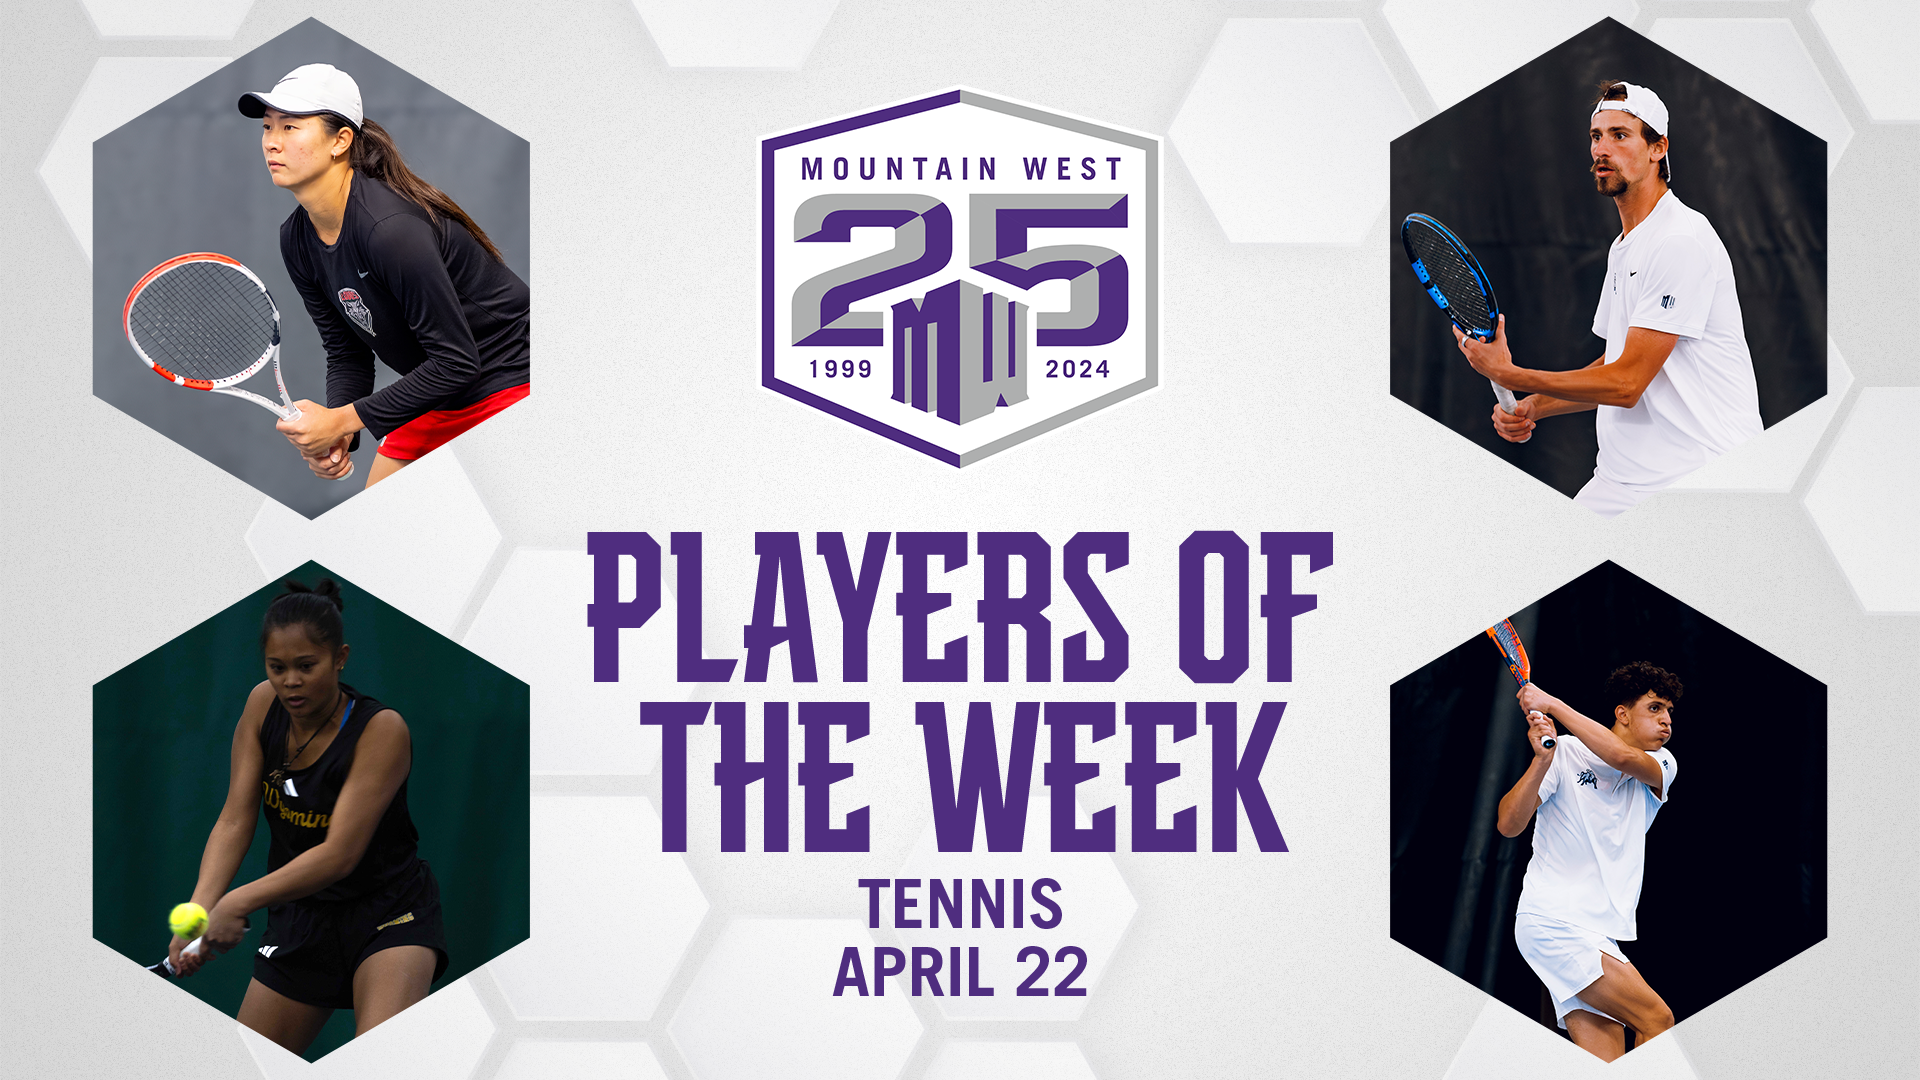 Mountain West Tennis Players of the Week - April 22